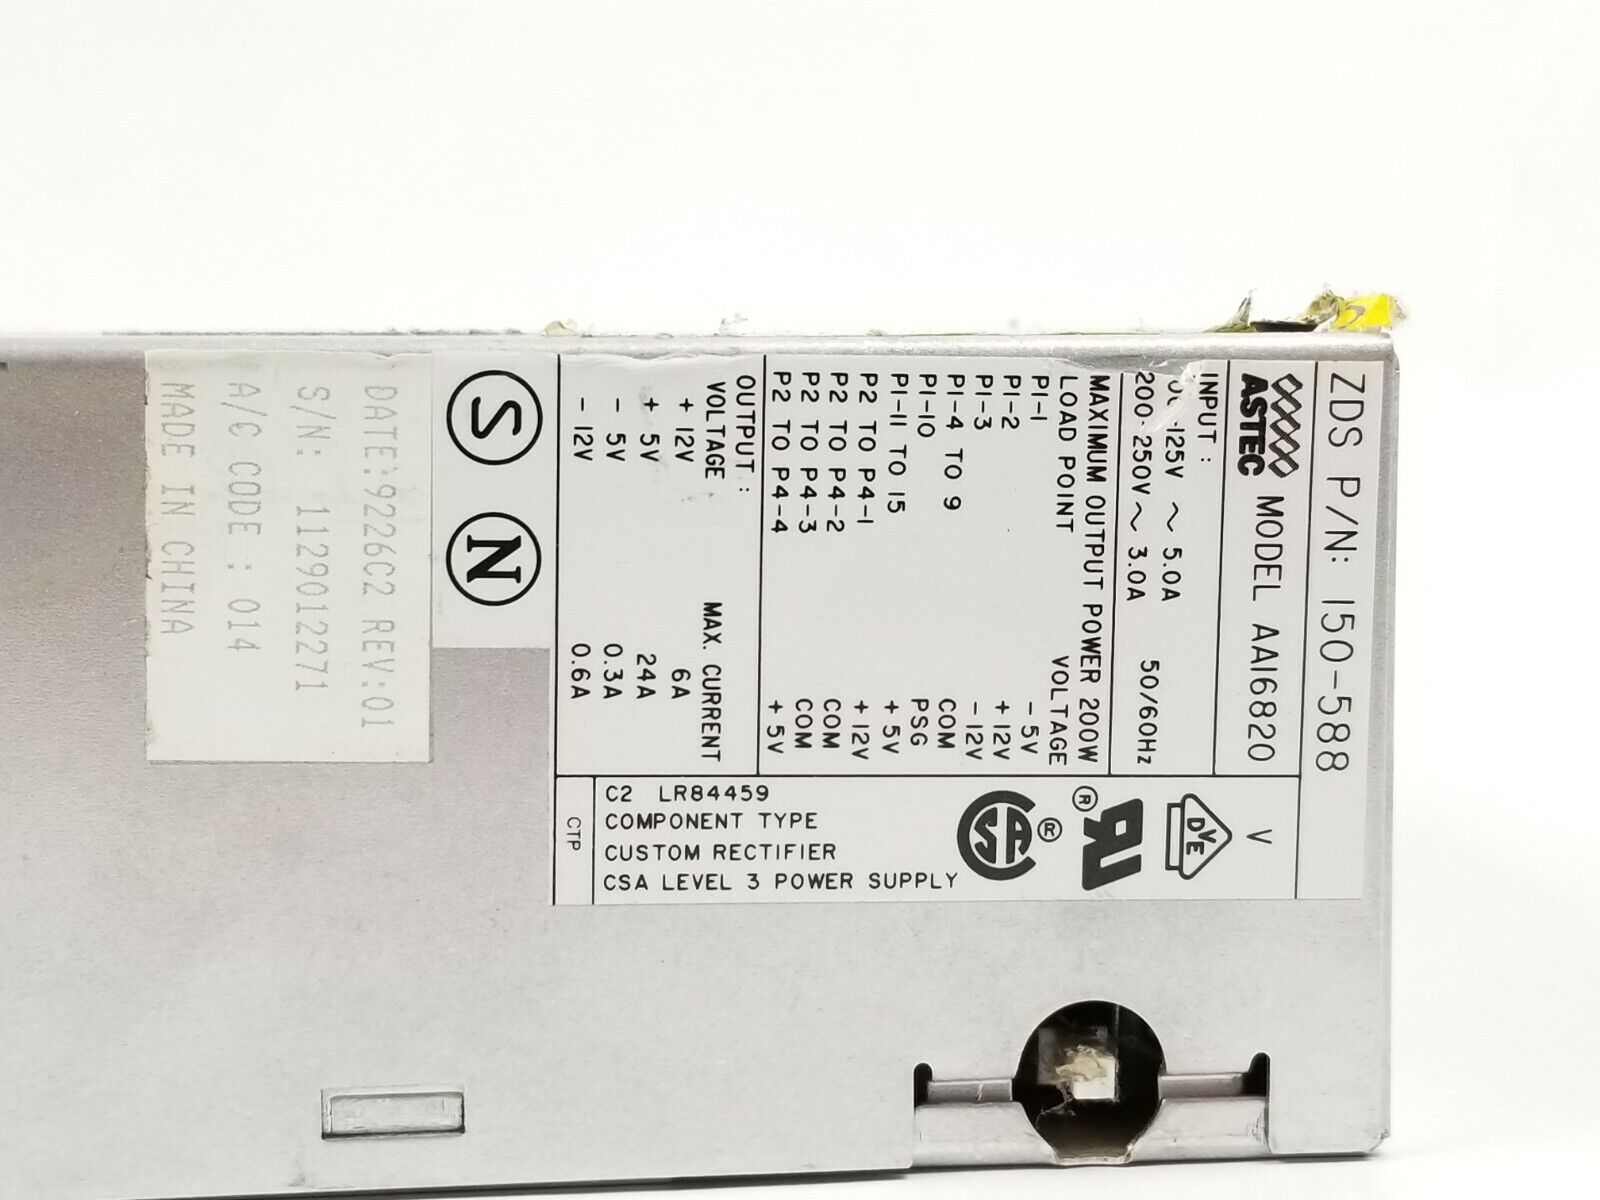 Zenith Data Systems 150-588 200W Power Supply ASTEC AA16820